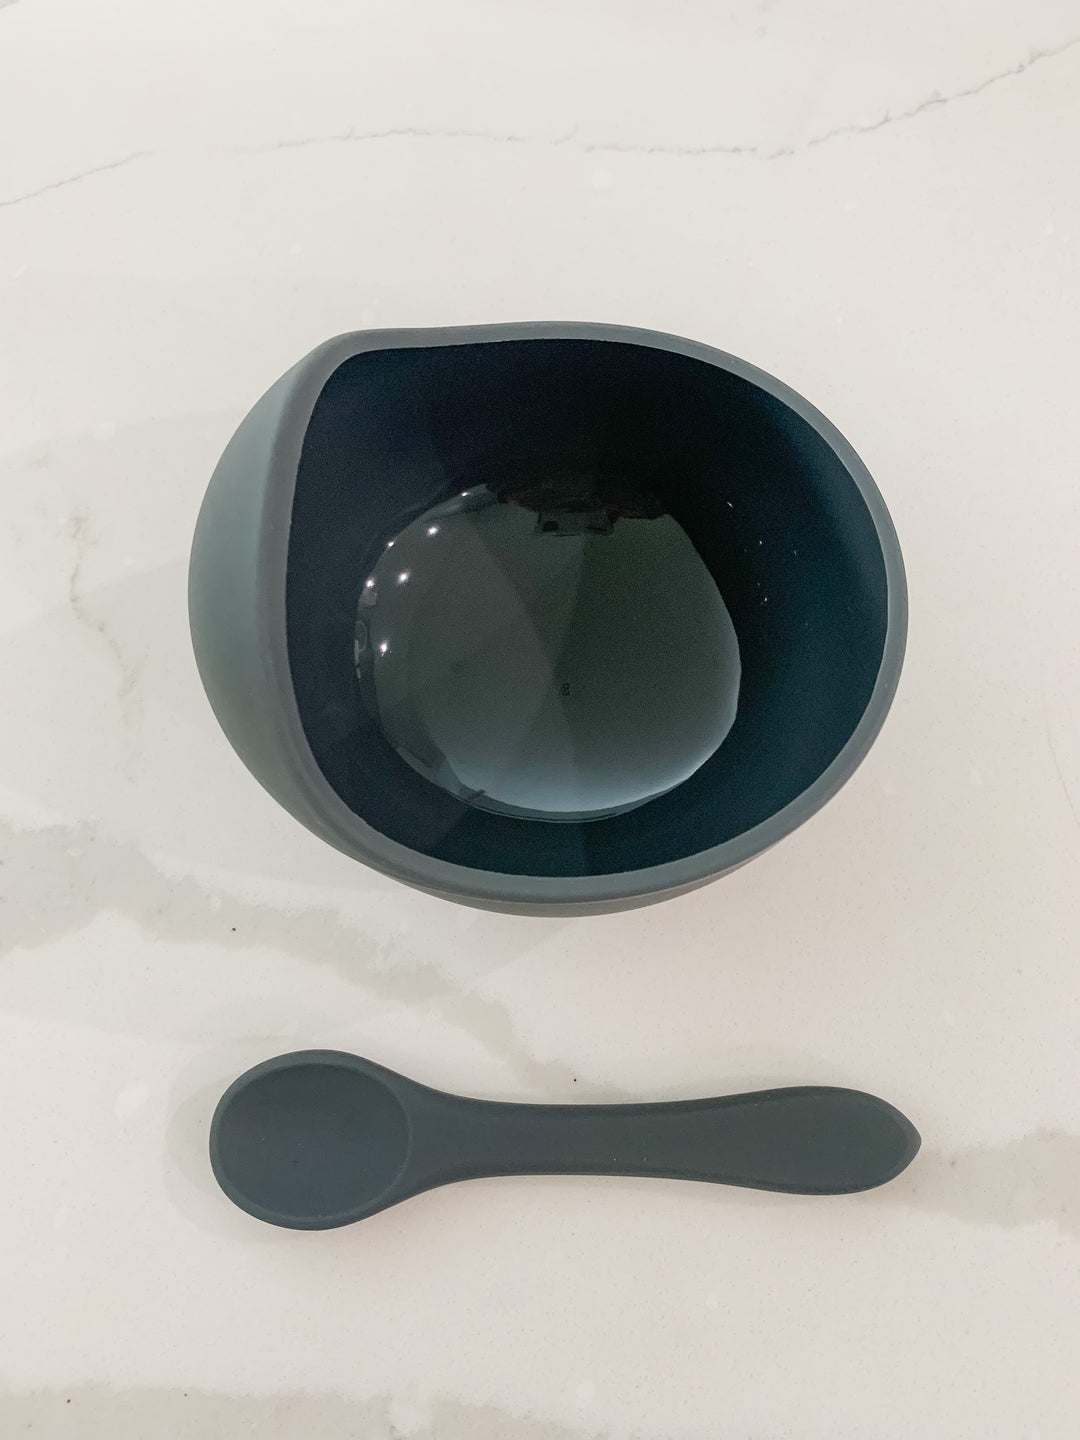 Slate Gray Silicone Suction Bowl w/ Spoon Set